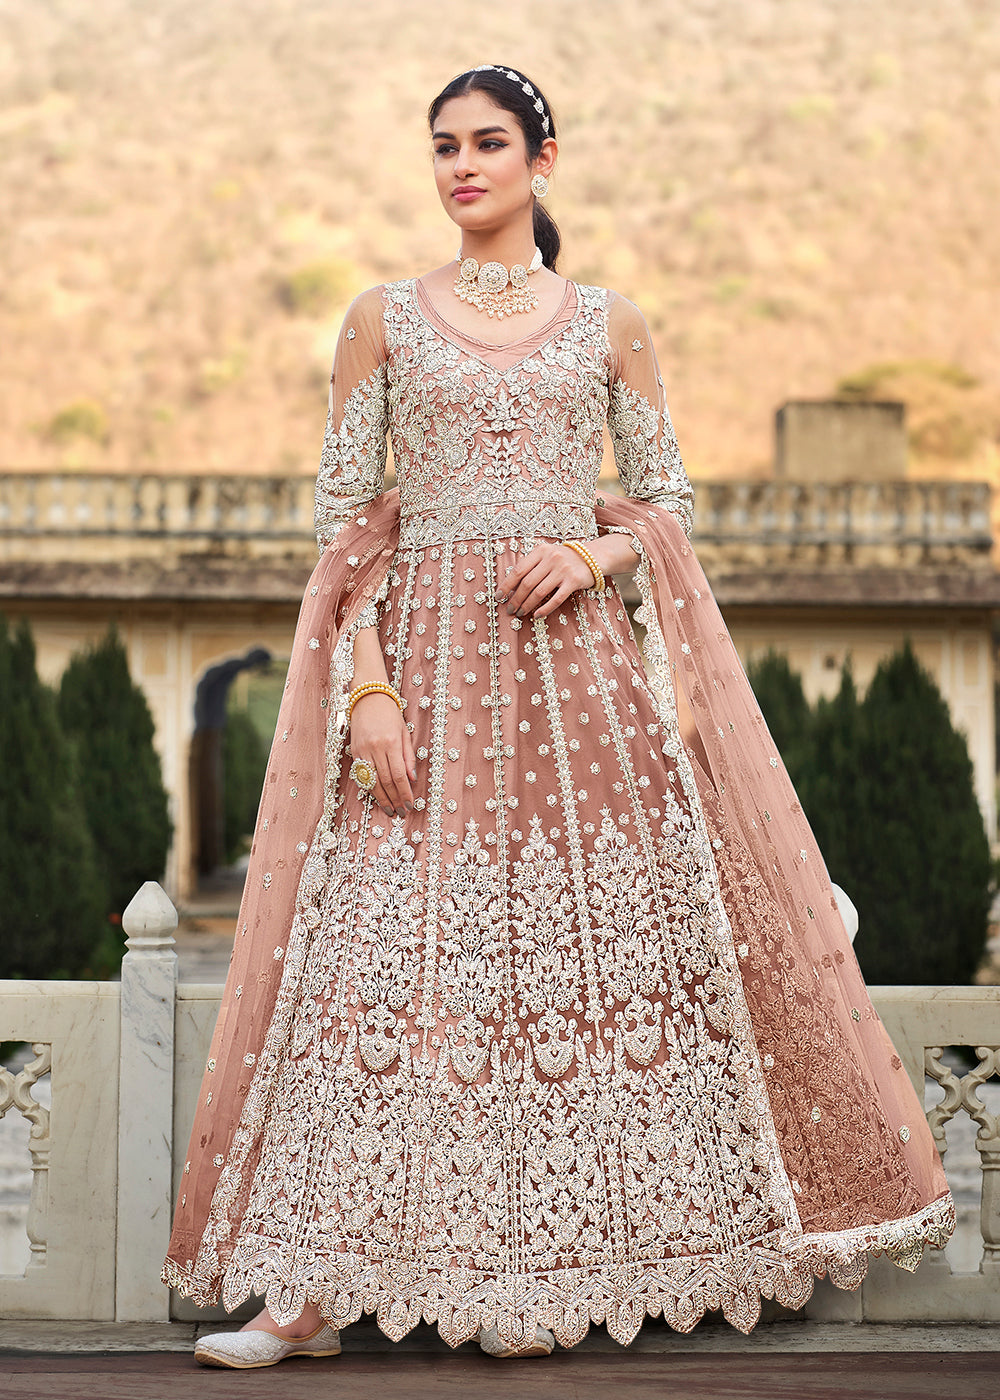 Buy Now Butterfly Net Peach Embroidered Wedding Bridesmaid Anarkali Suit Online in USA, UK, Australia, New Zealand, Canada, Italy & Worldwide at Empress Clothing.